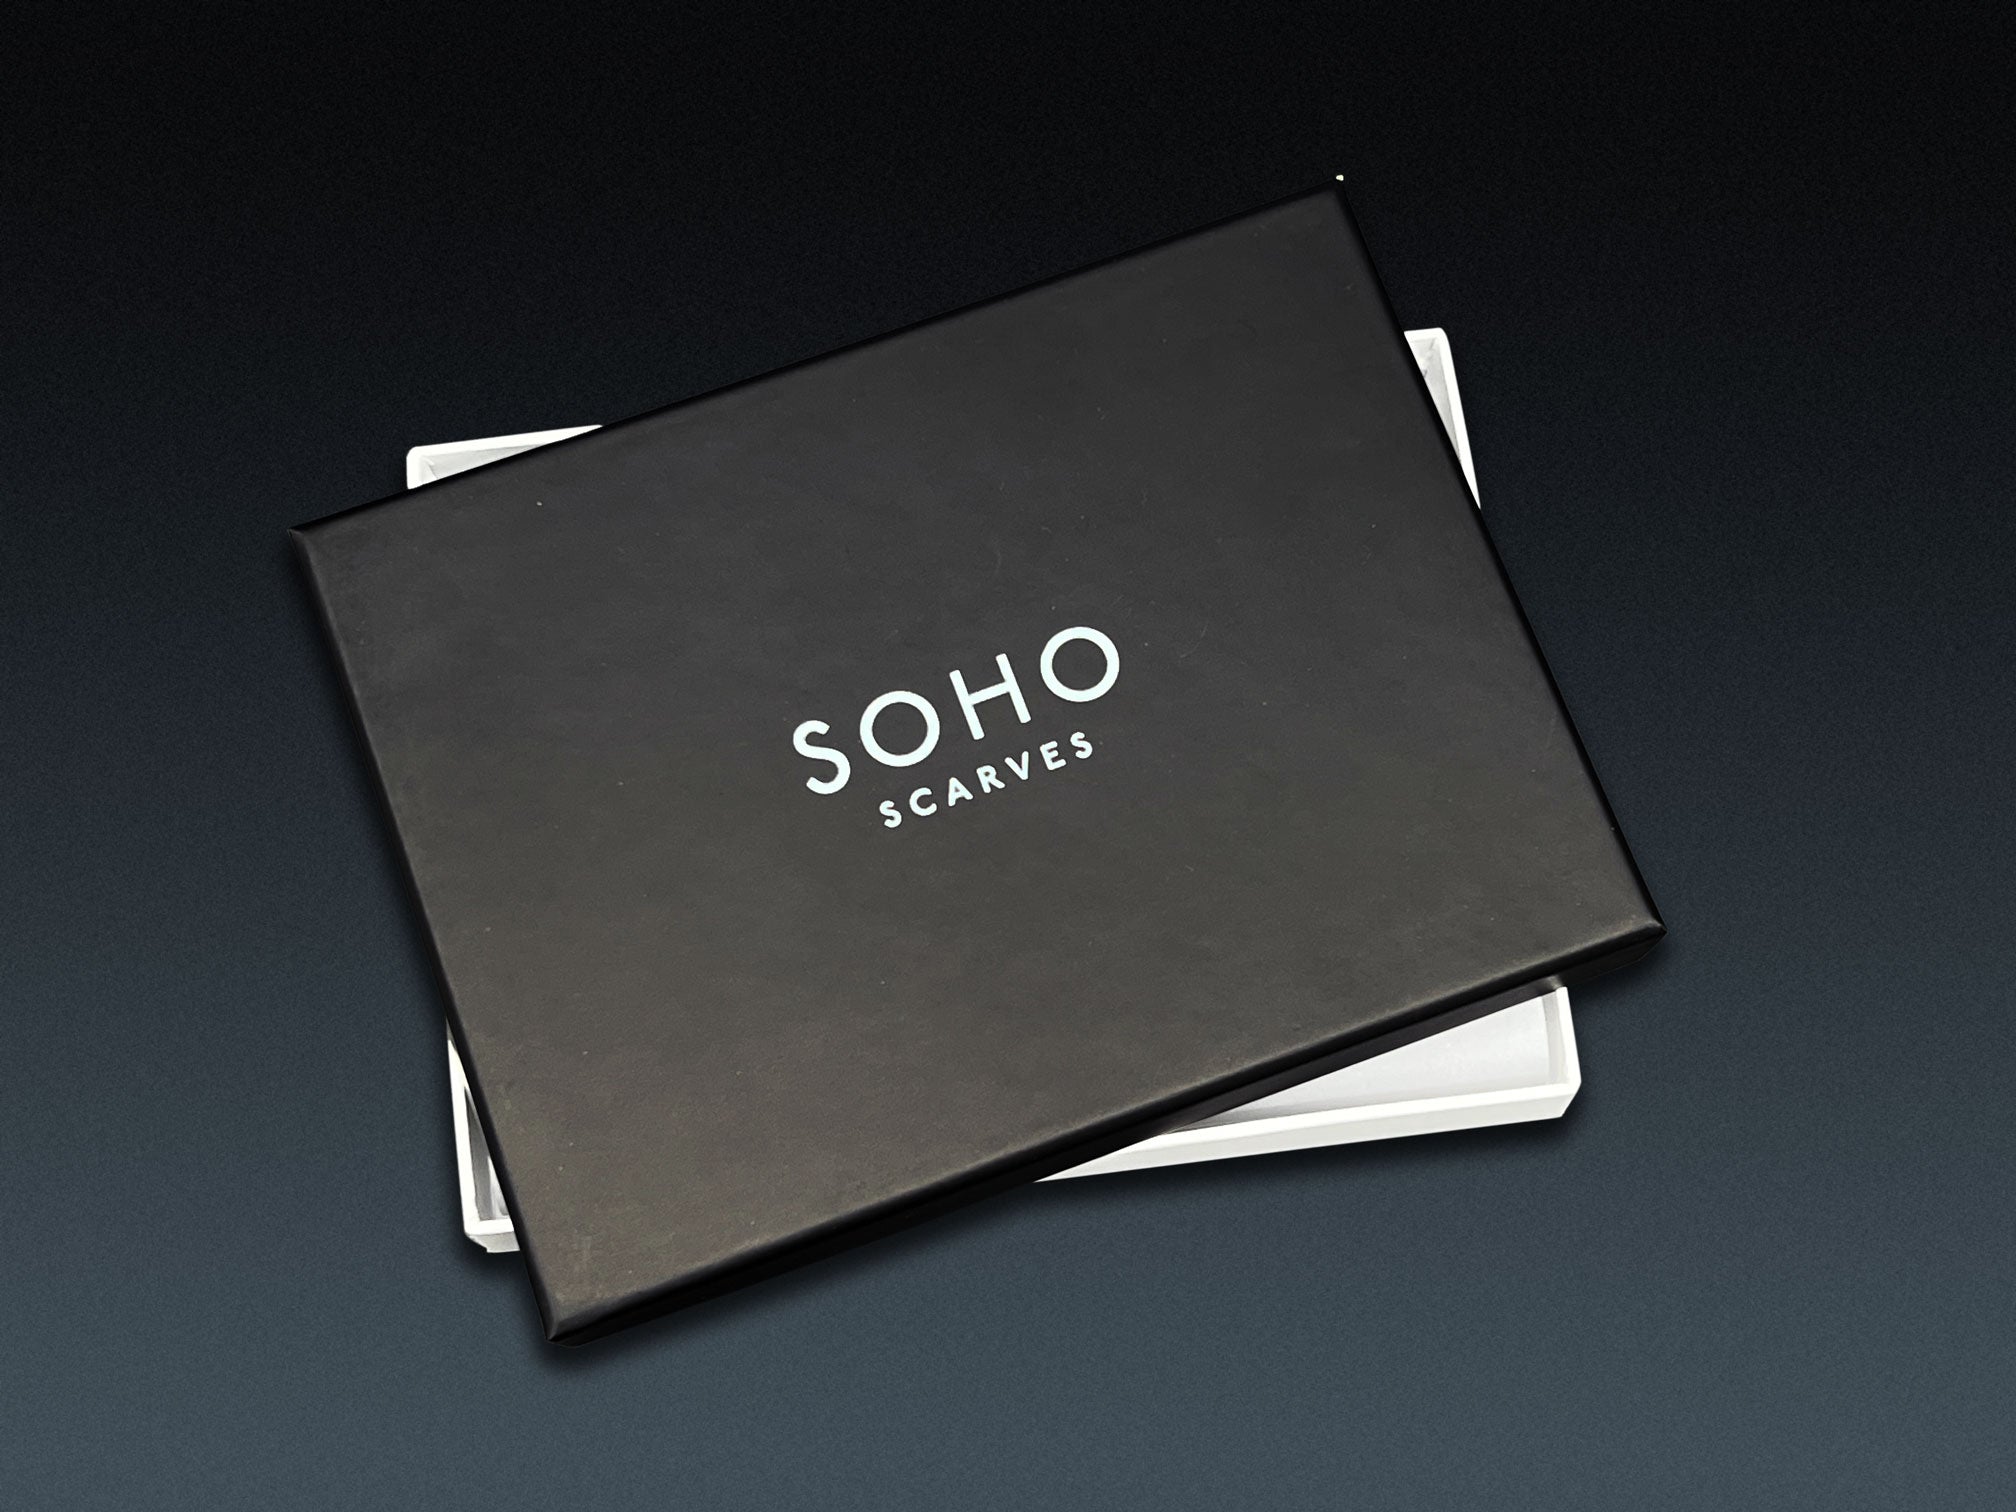 Small deluxe SOHO Scarves gift box for 'The House' pocket square.